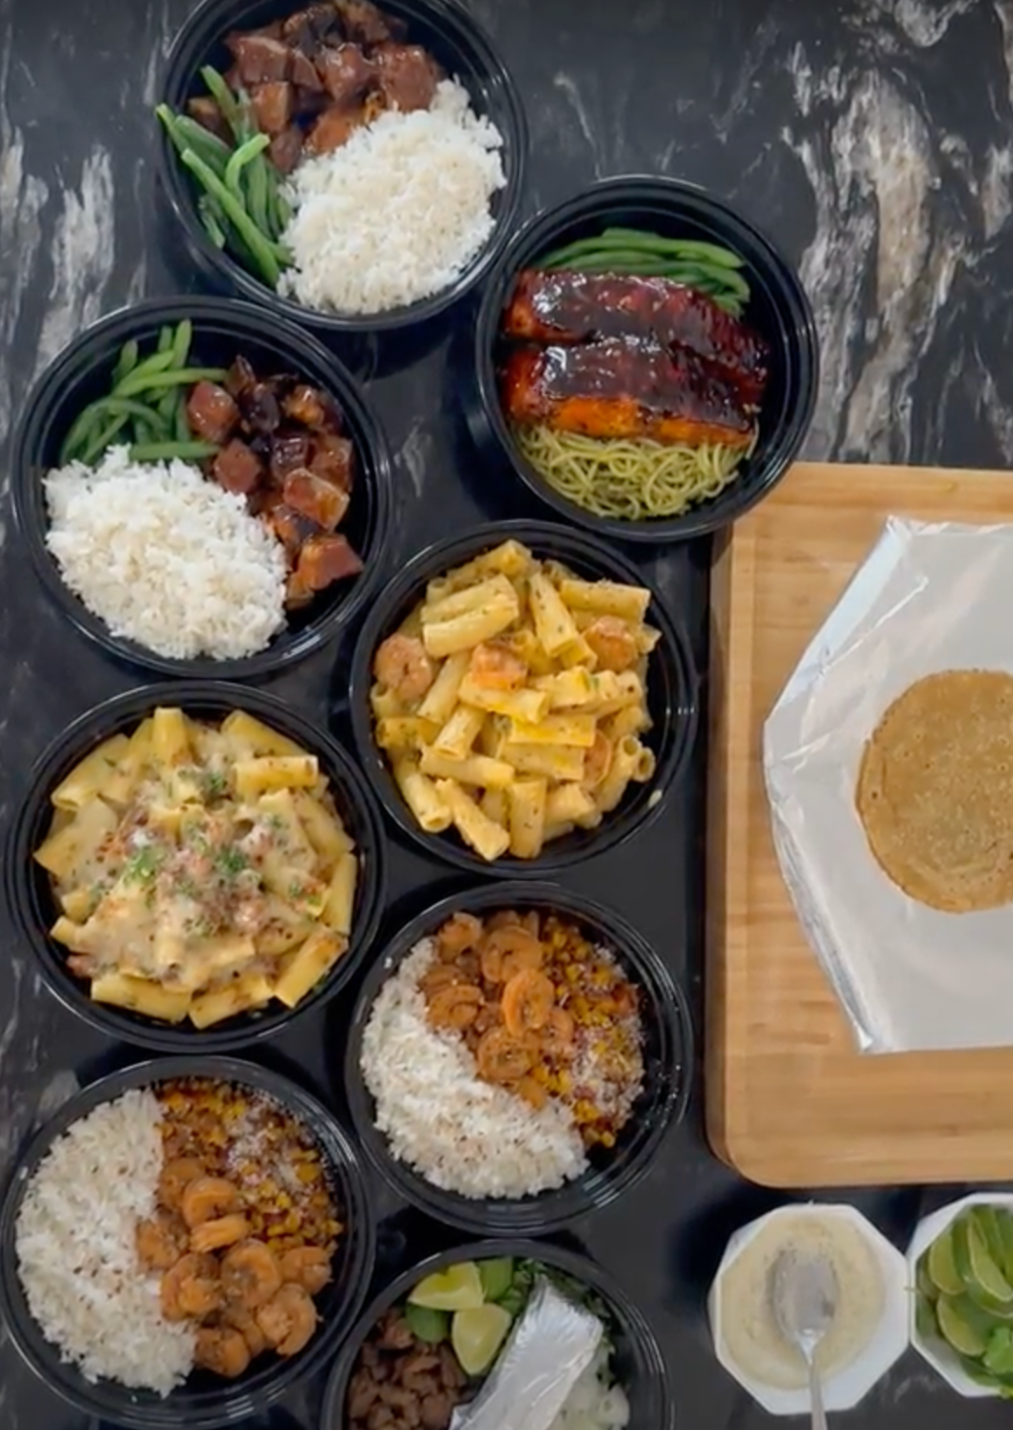 8 Meals for $80